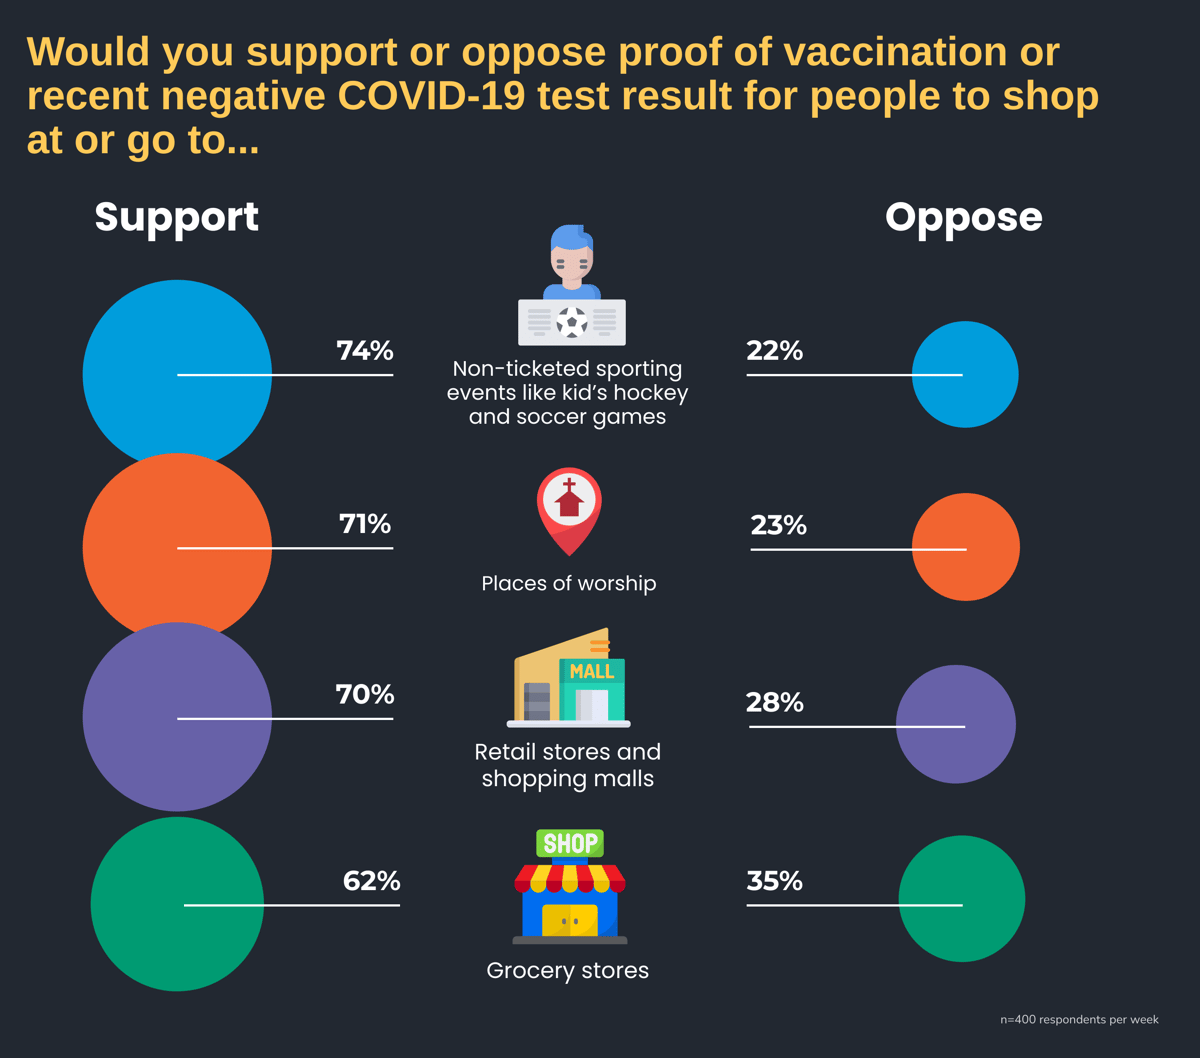 Would you support or oppose proof of vaccination or recent negative COVID-19 test result for people to shop at / go to